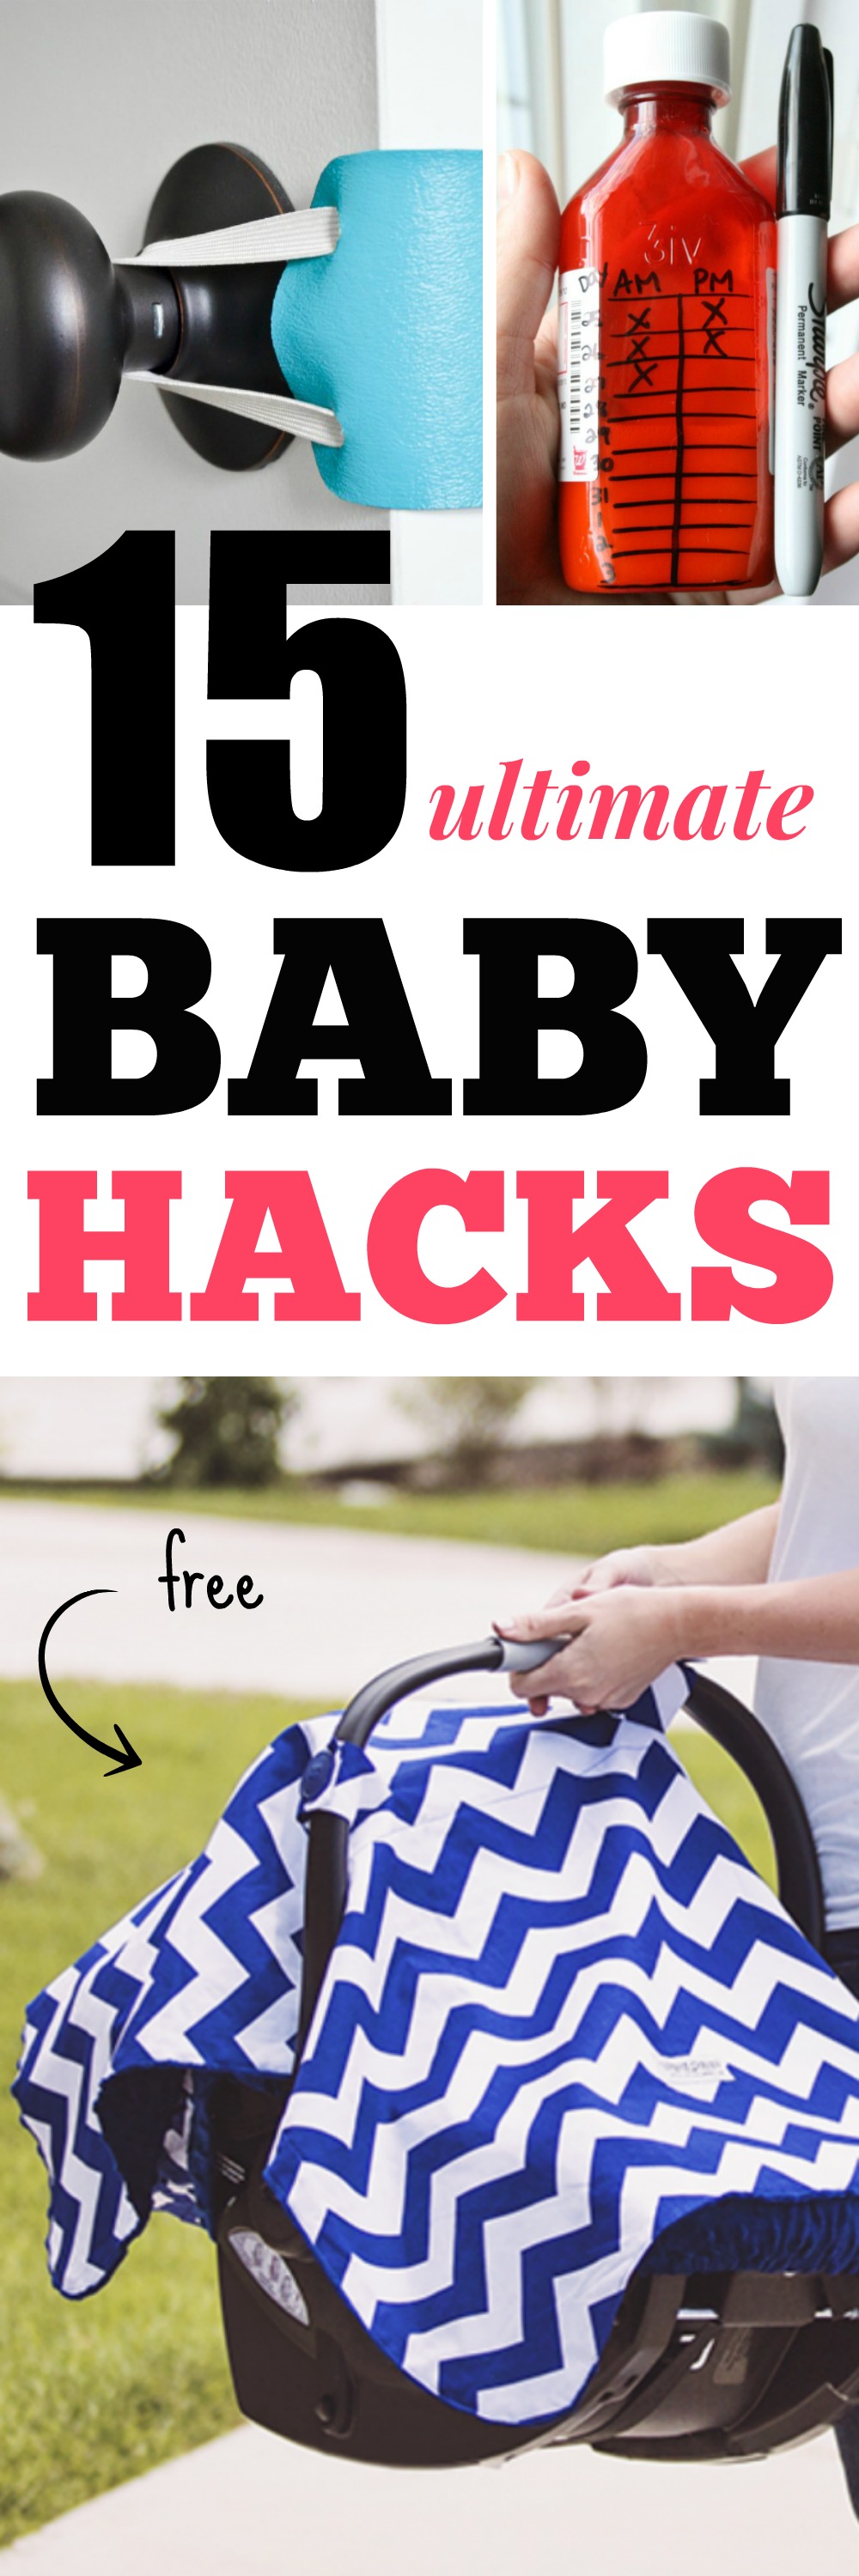 Great list of baby hacks! 15+ ideas to make a new mom's life easier!!